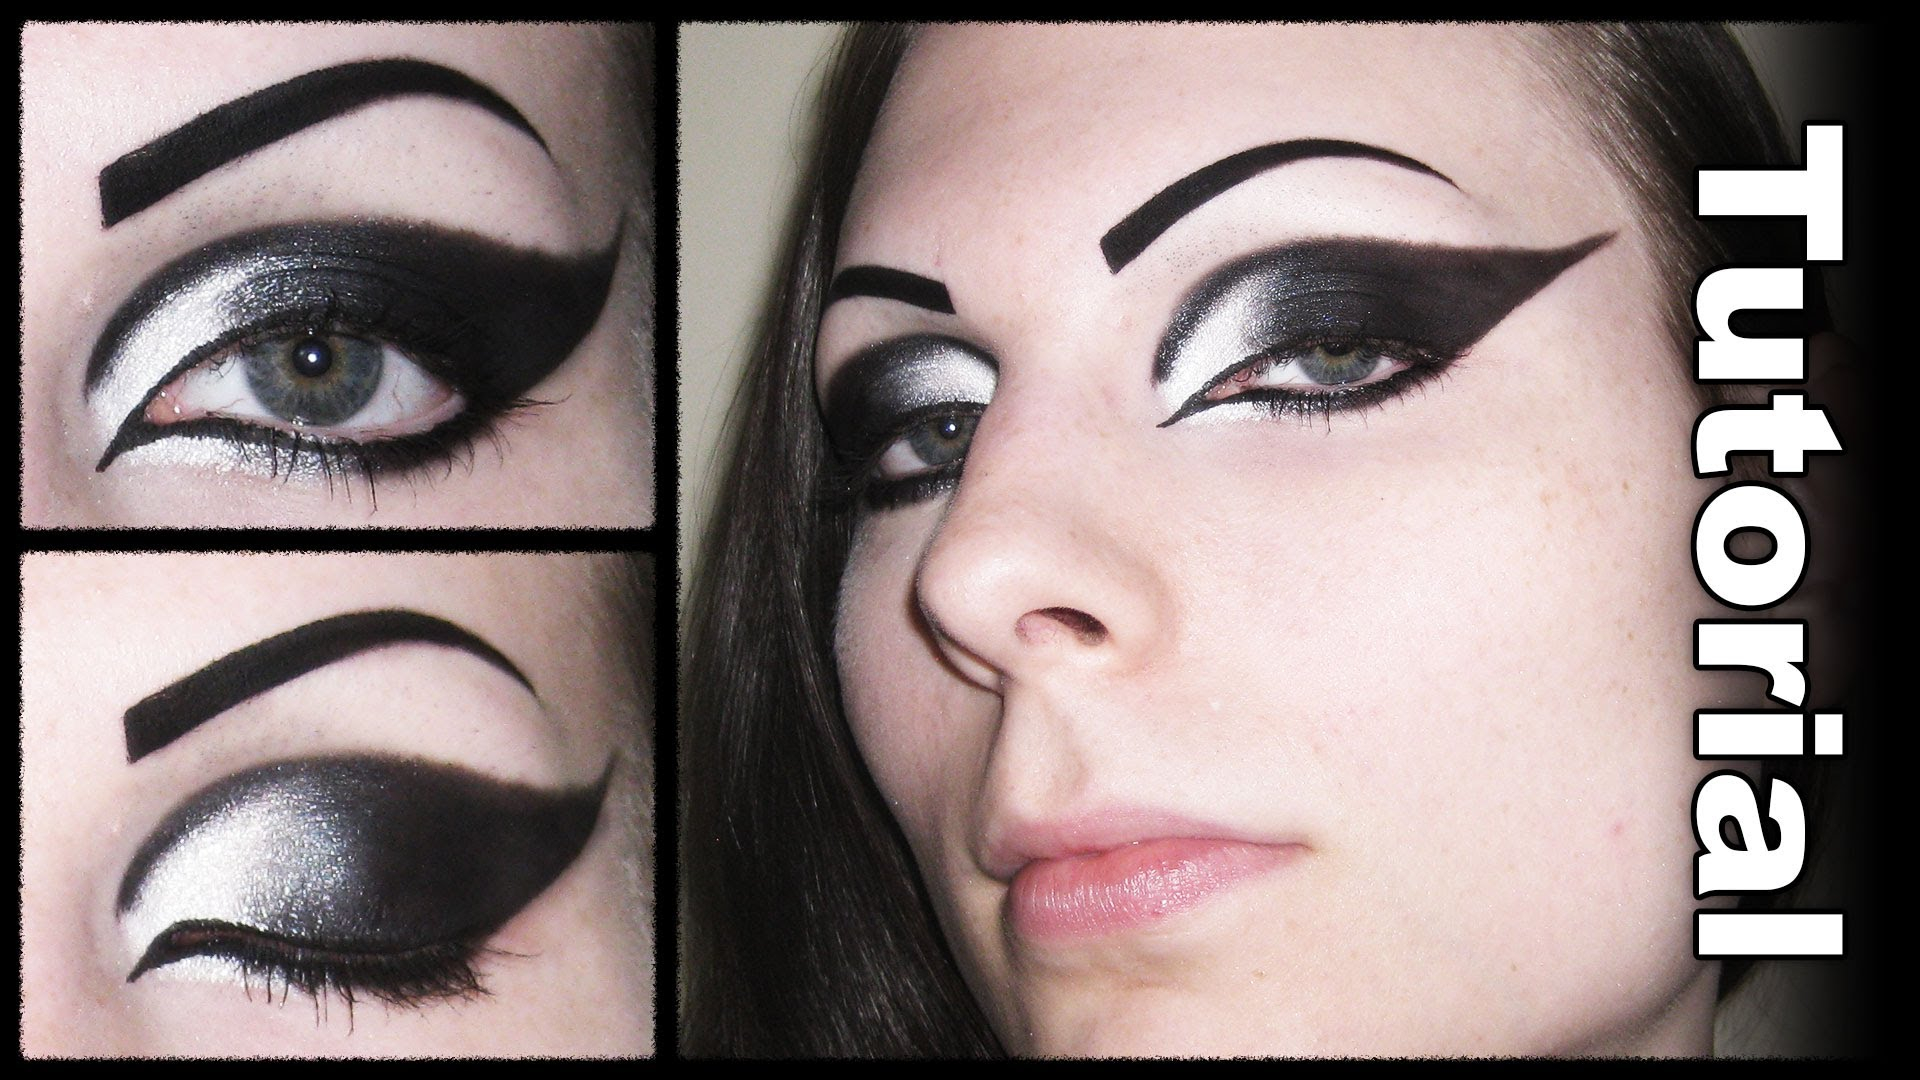 Black Cat Eye Makeup Dramatic Gothic White To Black Extended Winged Cat Eye Makeup Tutorial